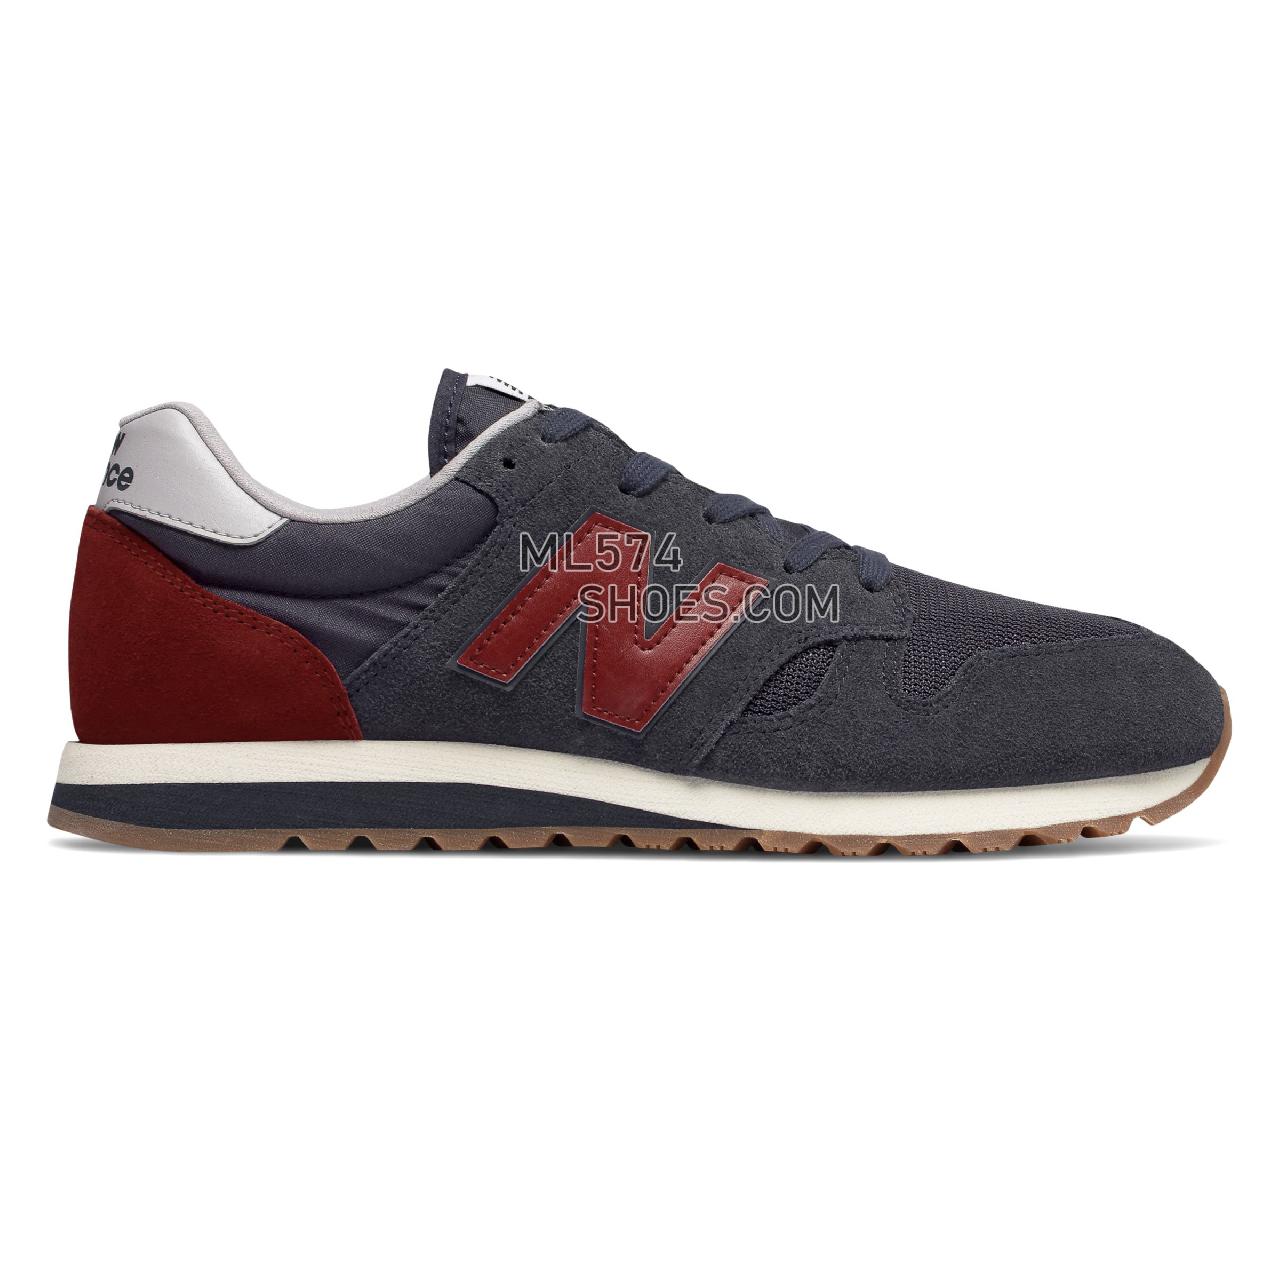 New Balance 520 - Unisex 520 - Classic Outerspace with Scarlet - U520EJ